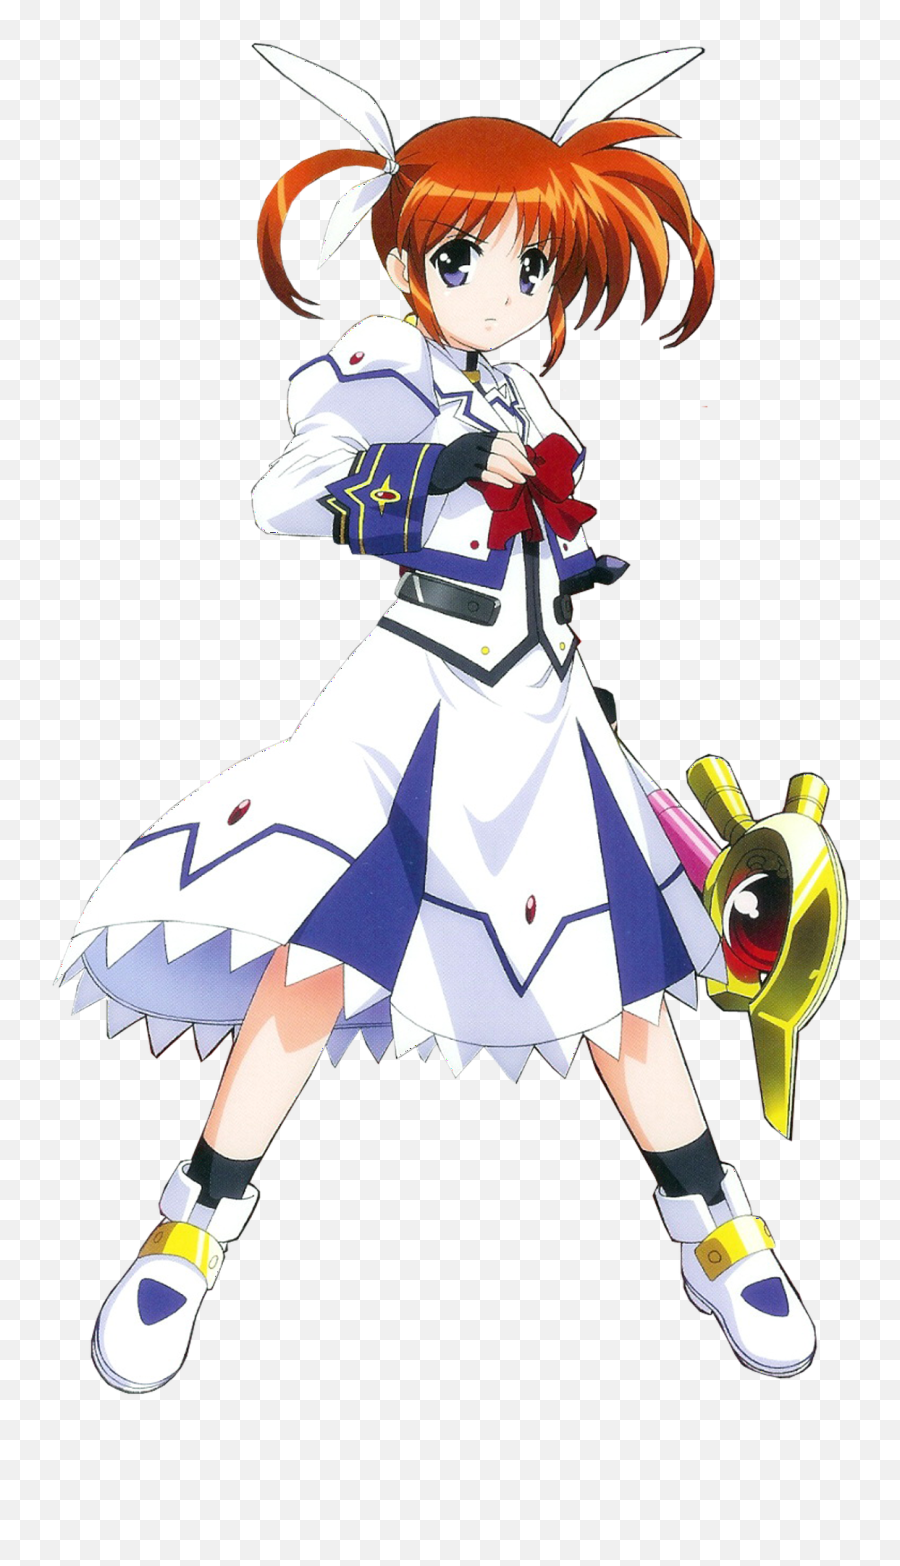 World Of Hearts Linked As One - Chapter 12 Kingjustin1019 Nanoha Png Emoji,Anime About Linked Emotions